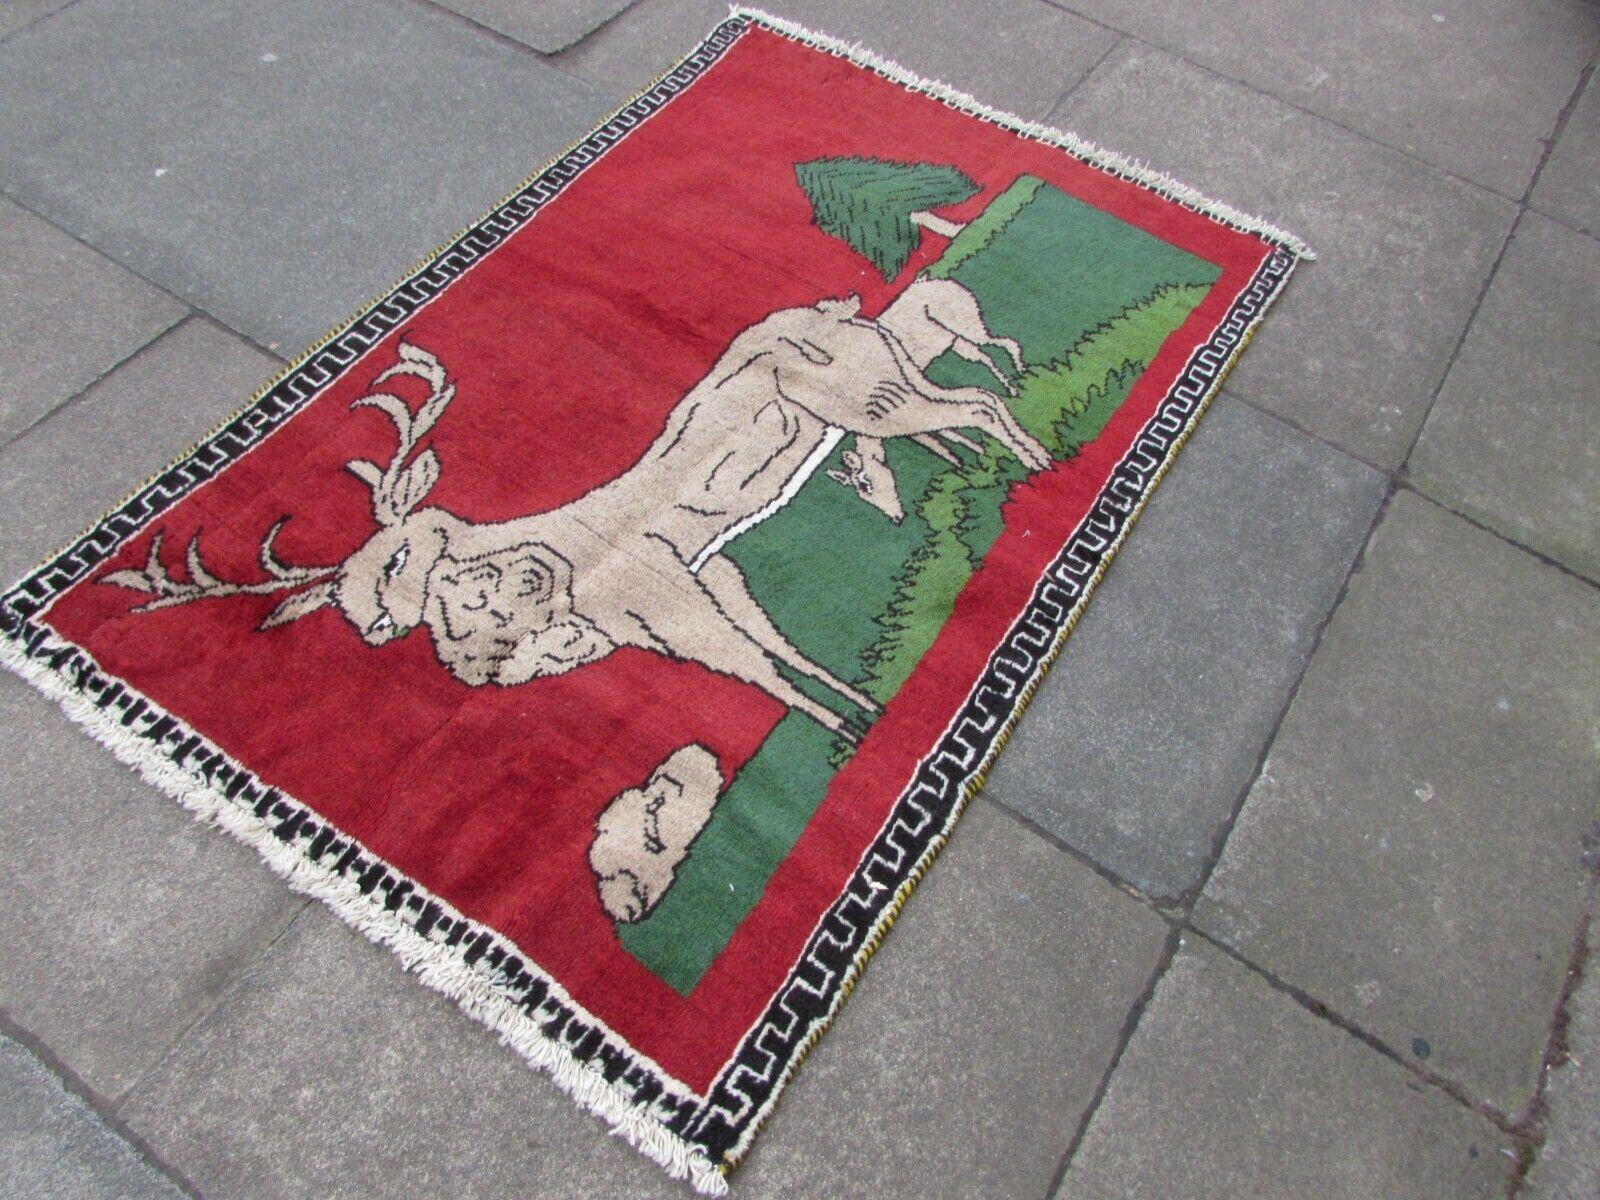 French Handmade Vintage Persian Style Gabbeh Rug With Deer 2.6' x 4', 1970s - 1Q71 For Sale